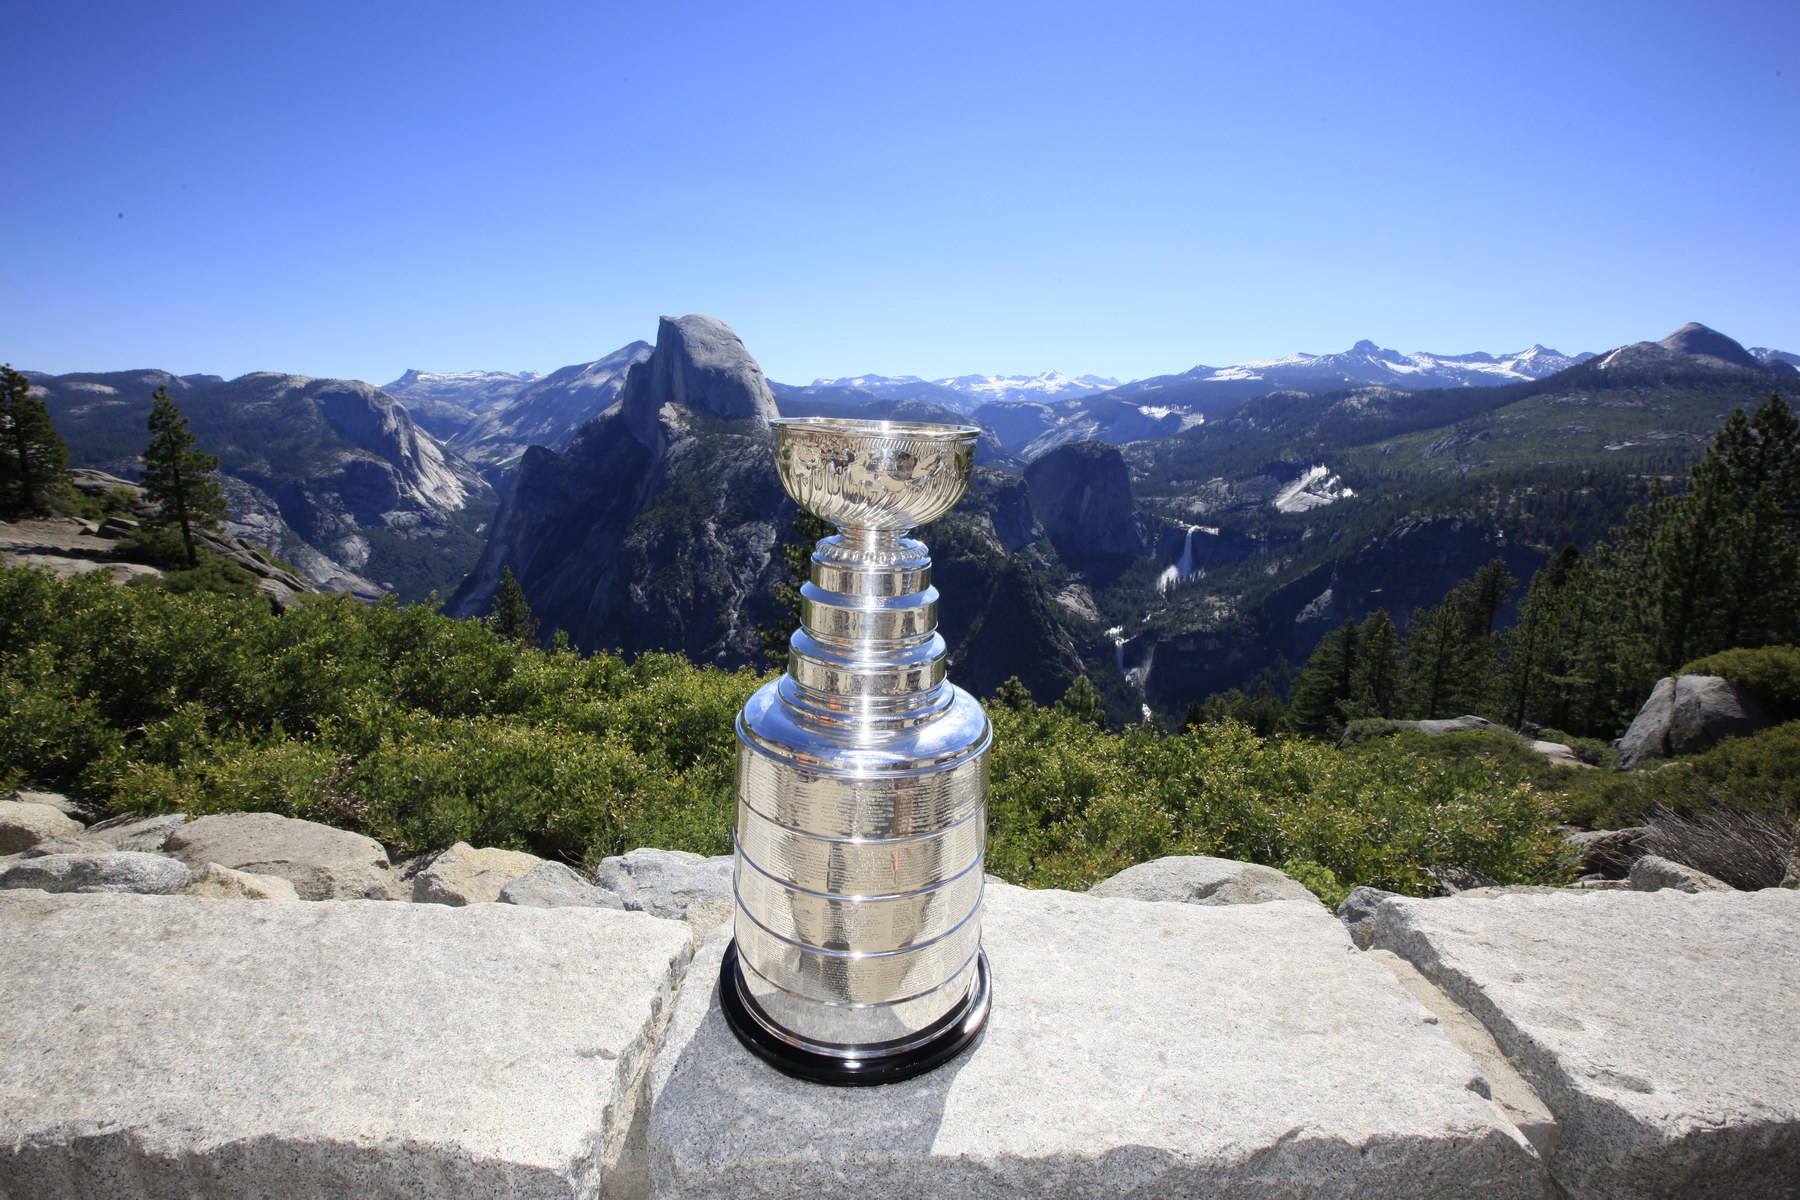 Hopefully the Stanley Cup will get a view of Mount Rainier soon. Photo by StanleyCupYosemiteVisit/Flickr